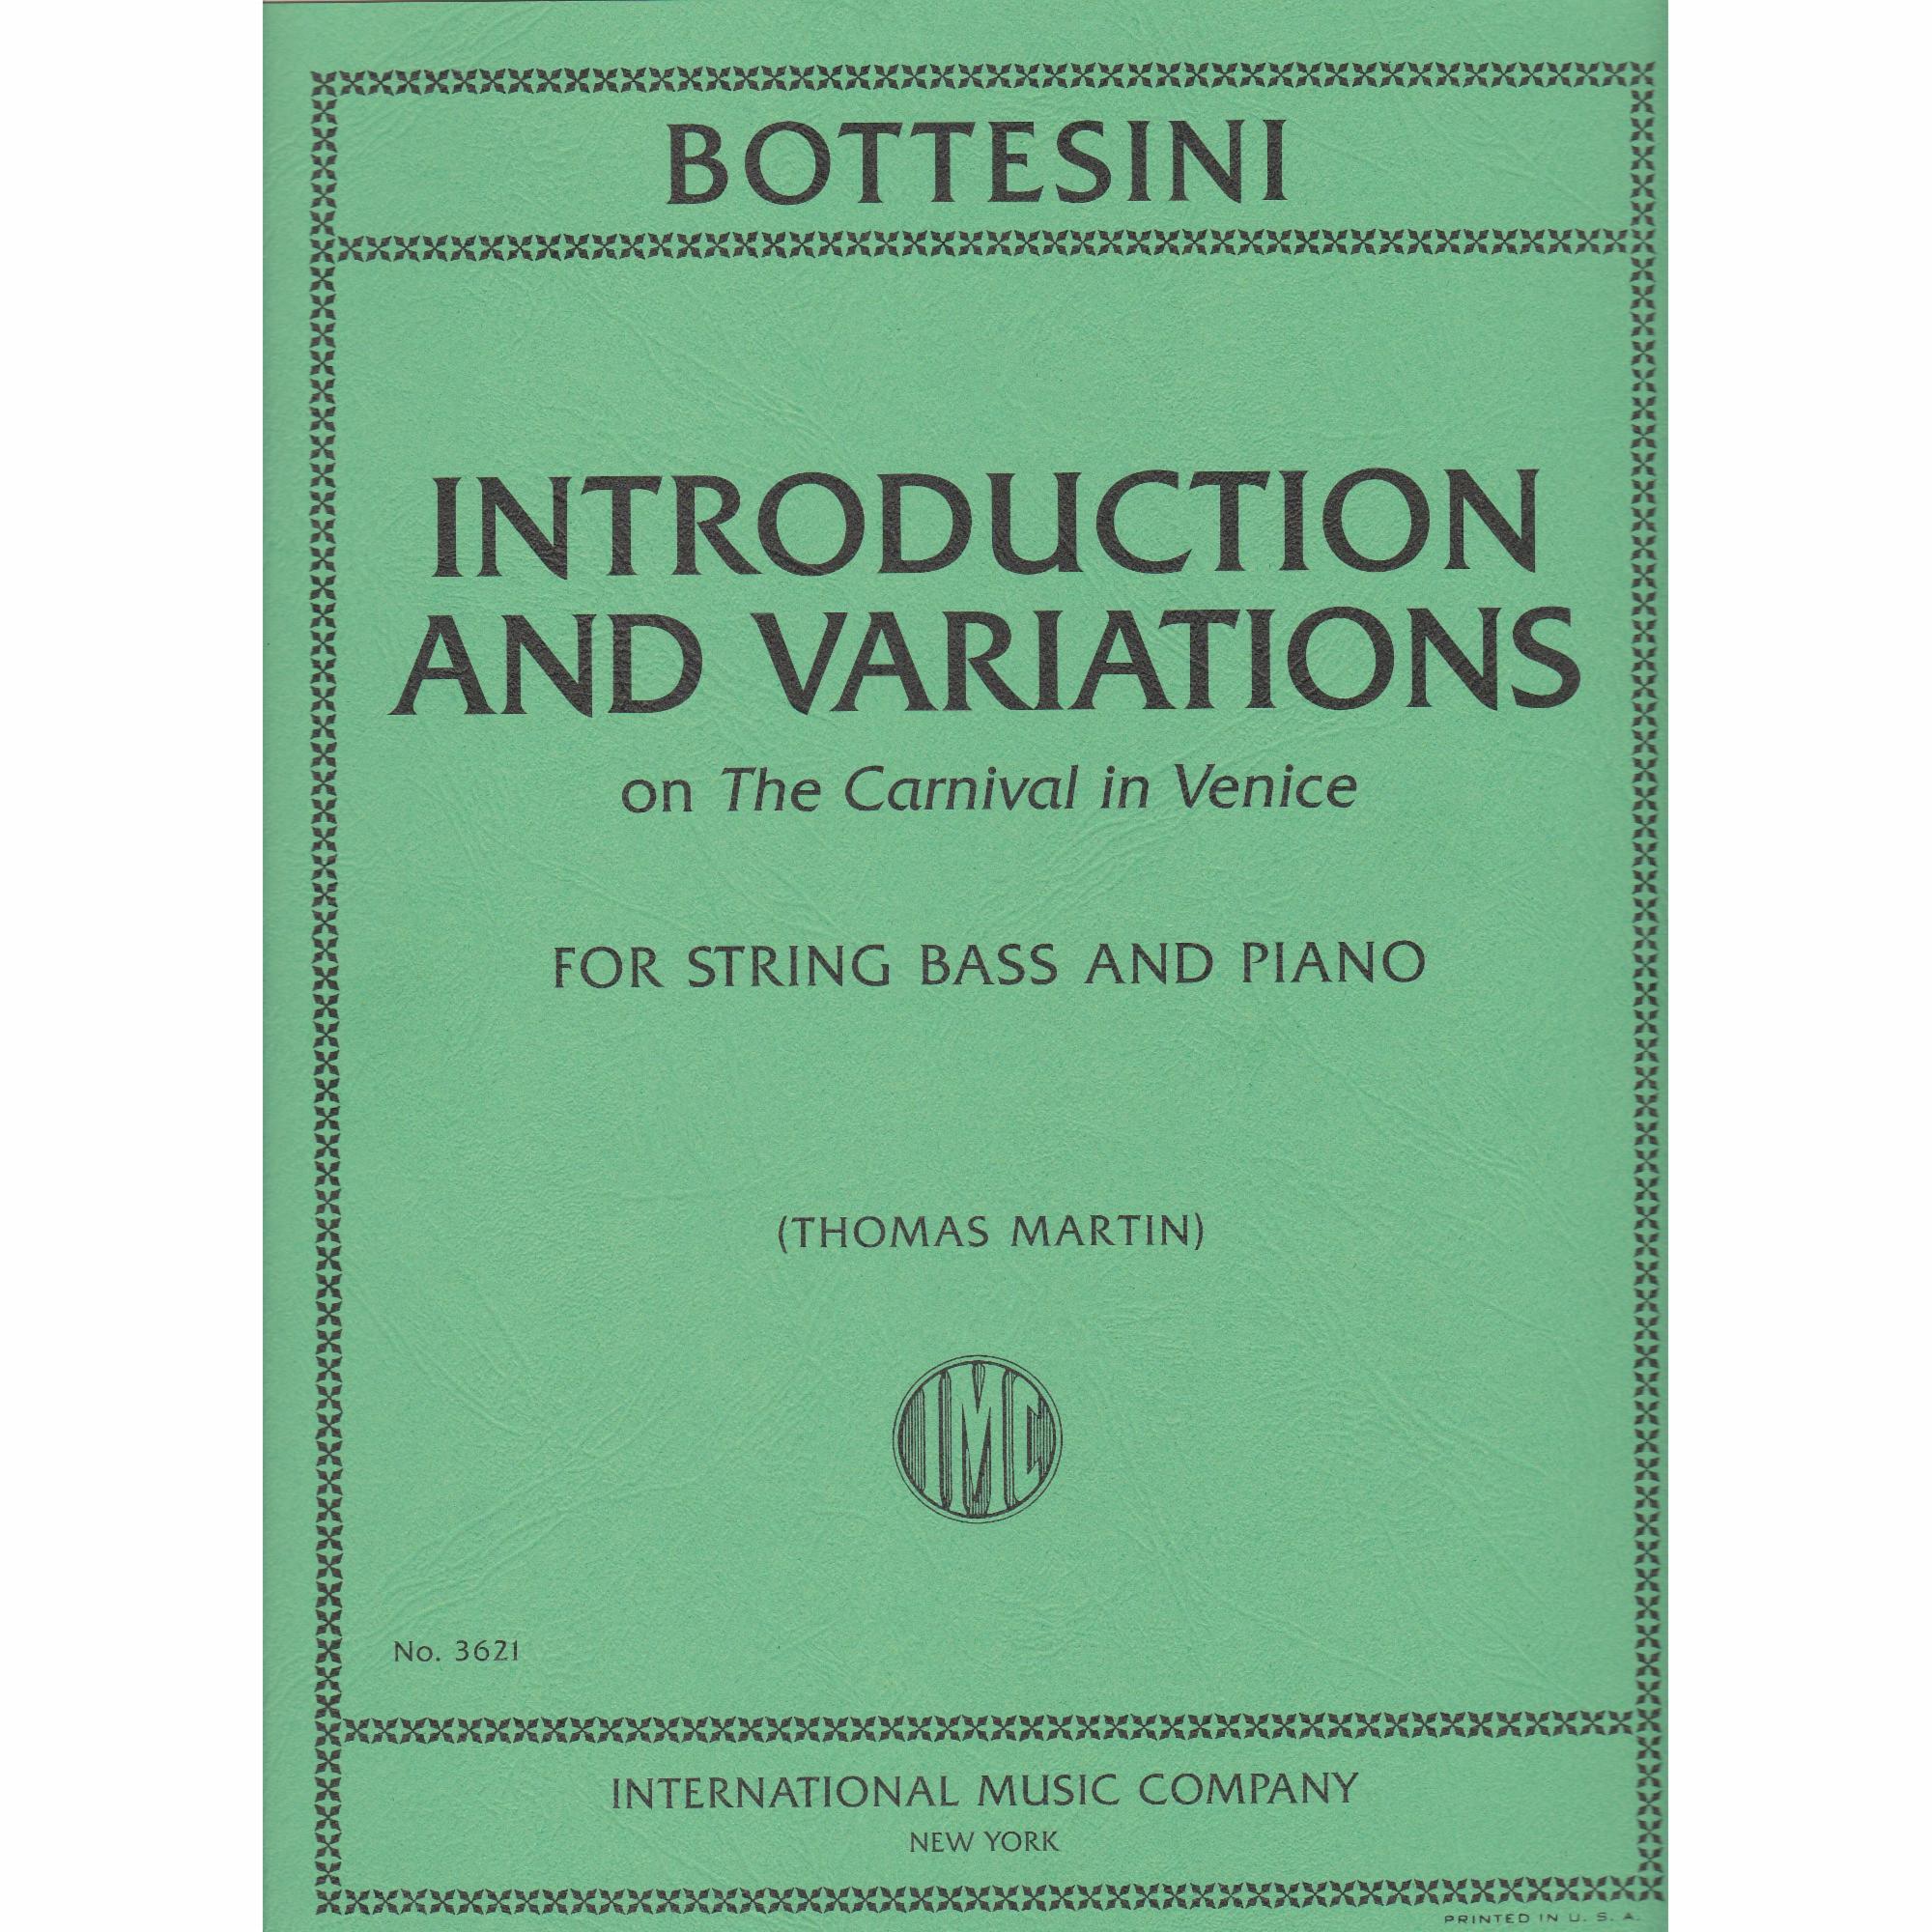 Introduction and Variations on The Carnival in Venice for Bass and Piano